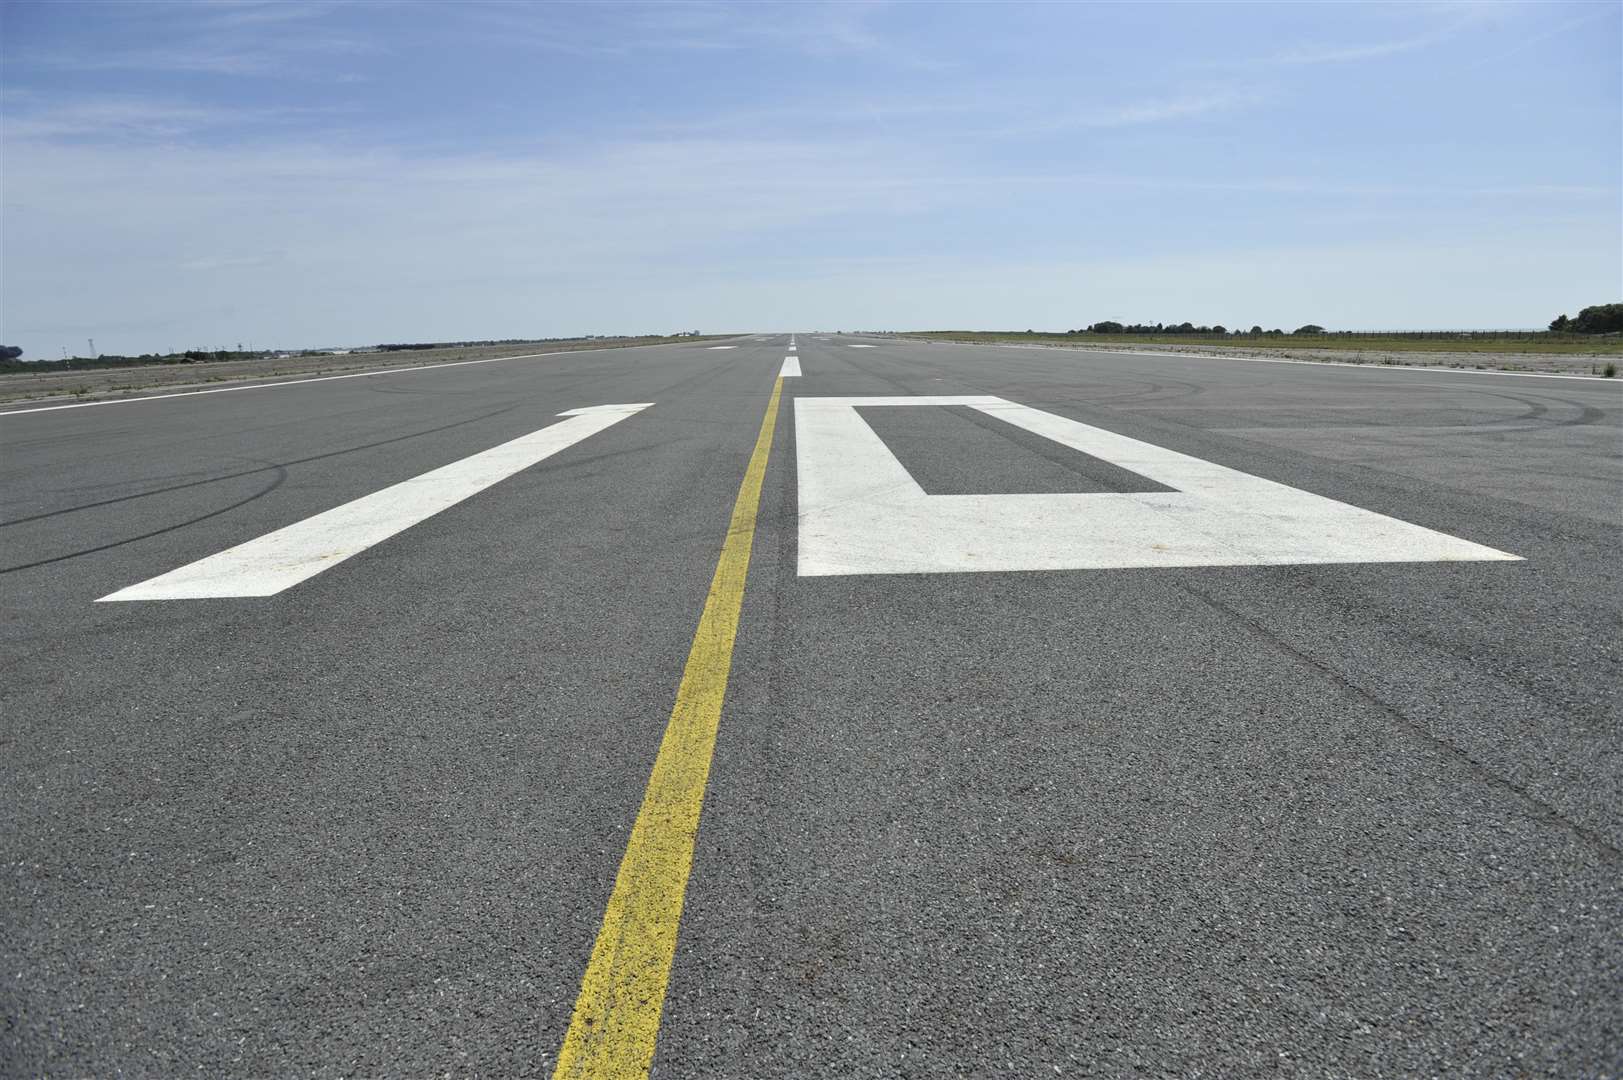 The runway at the former Manston airport